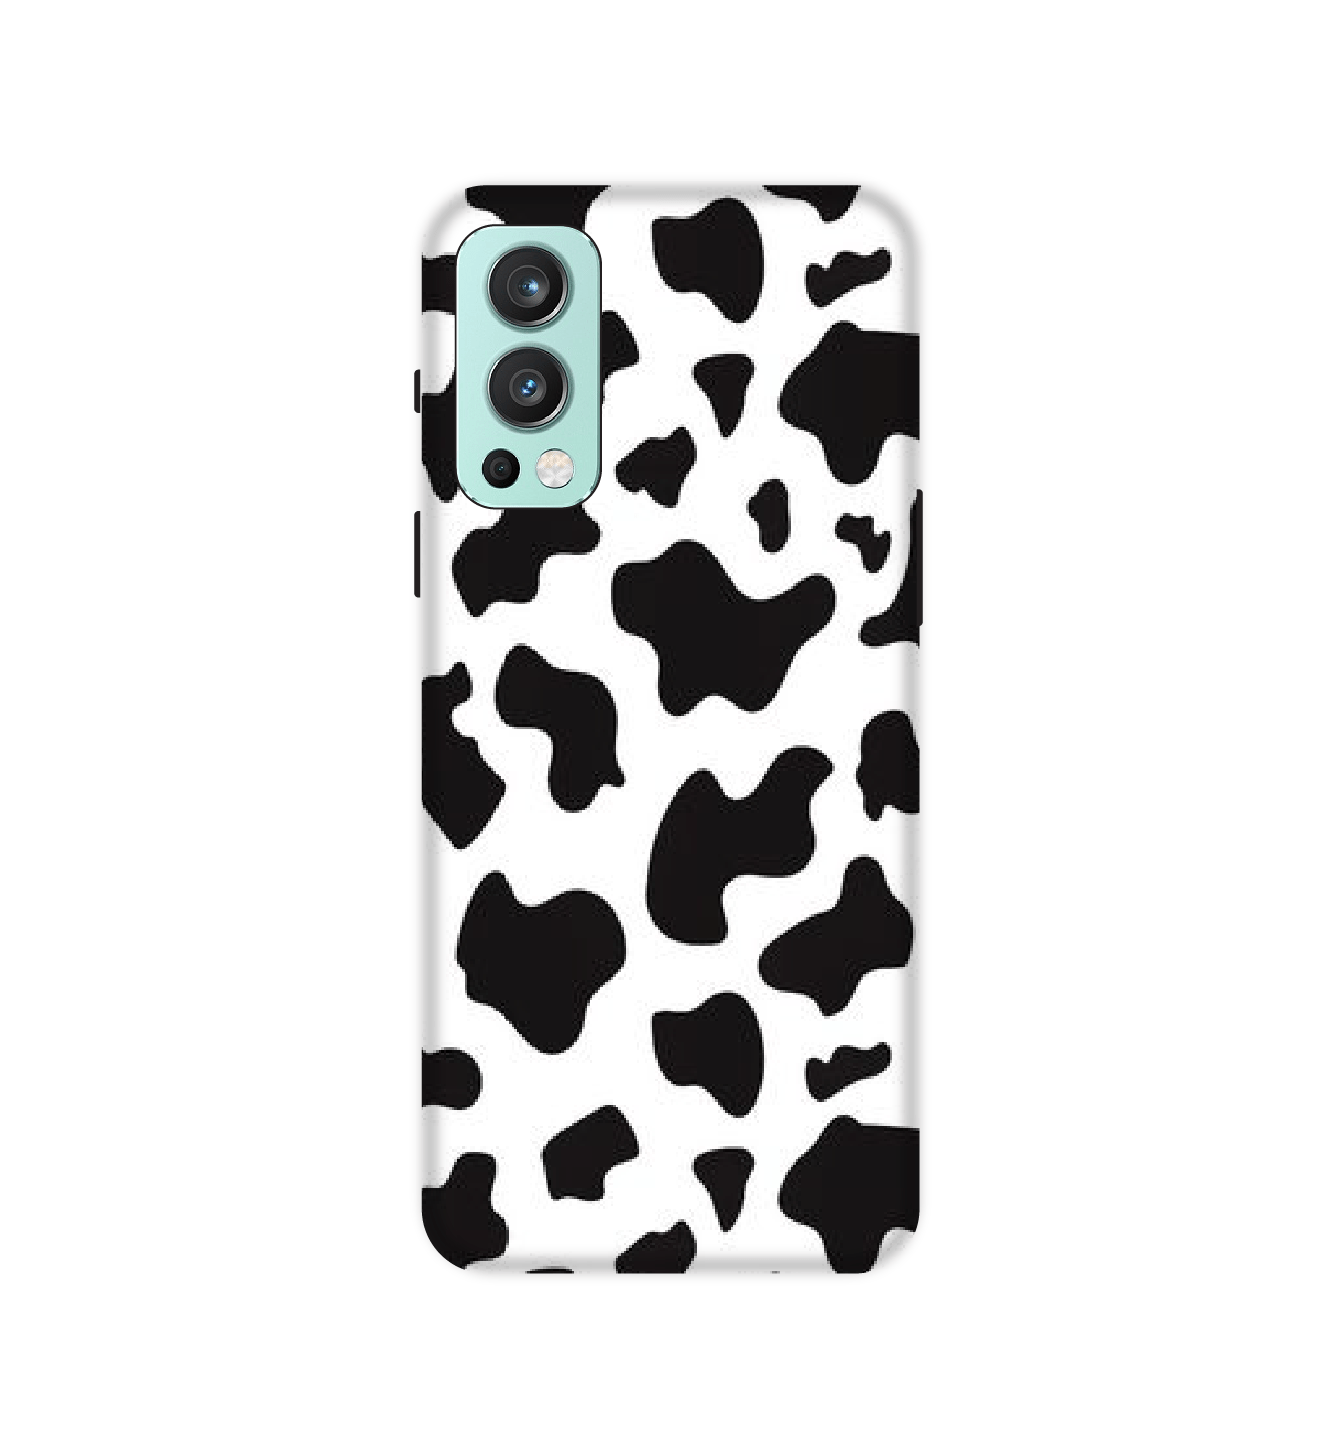 Cow Print - Hard Cases For OnePlus Models